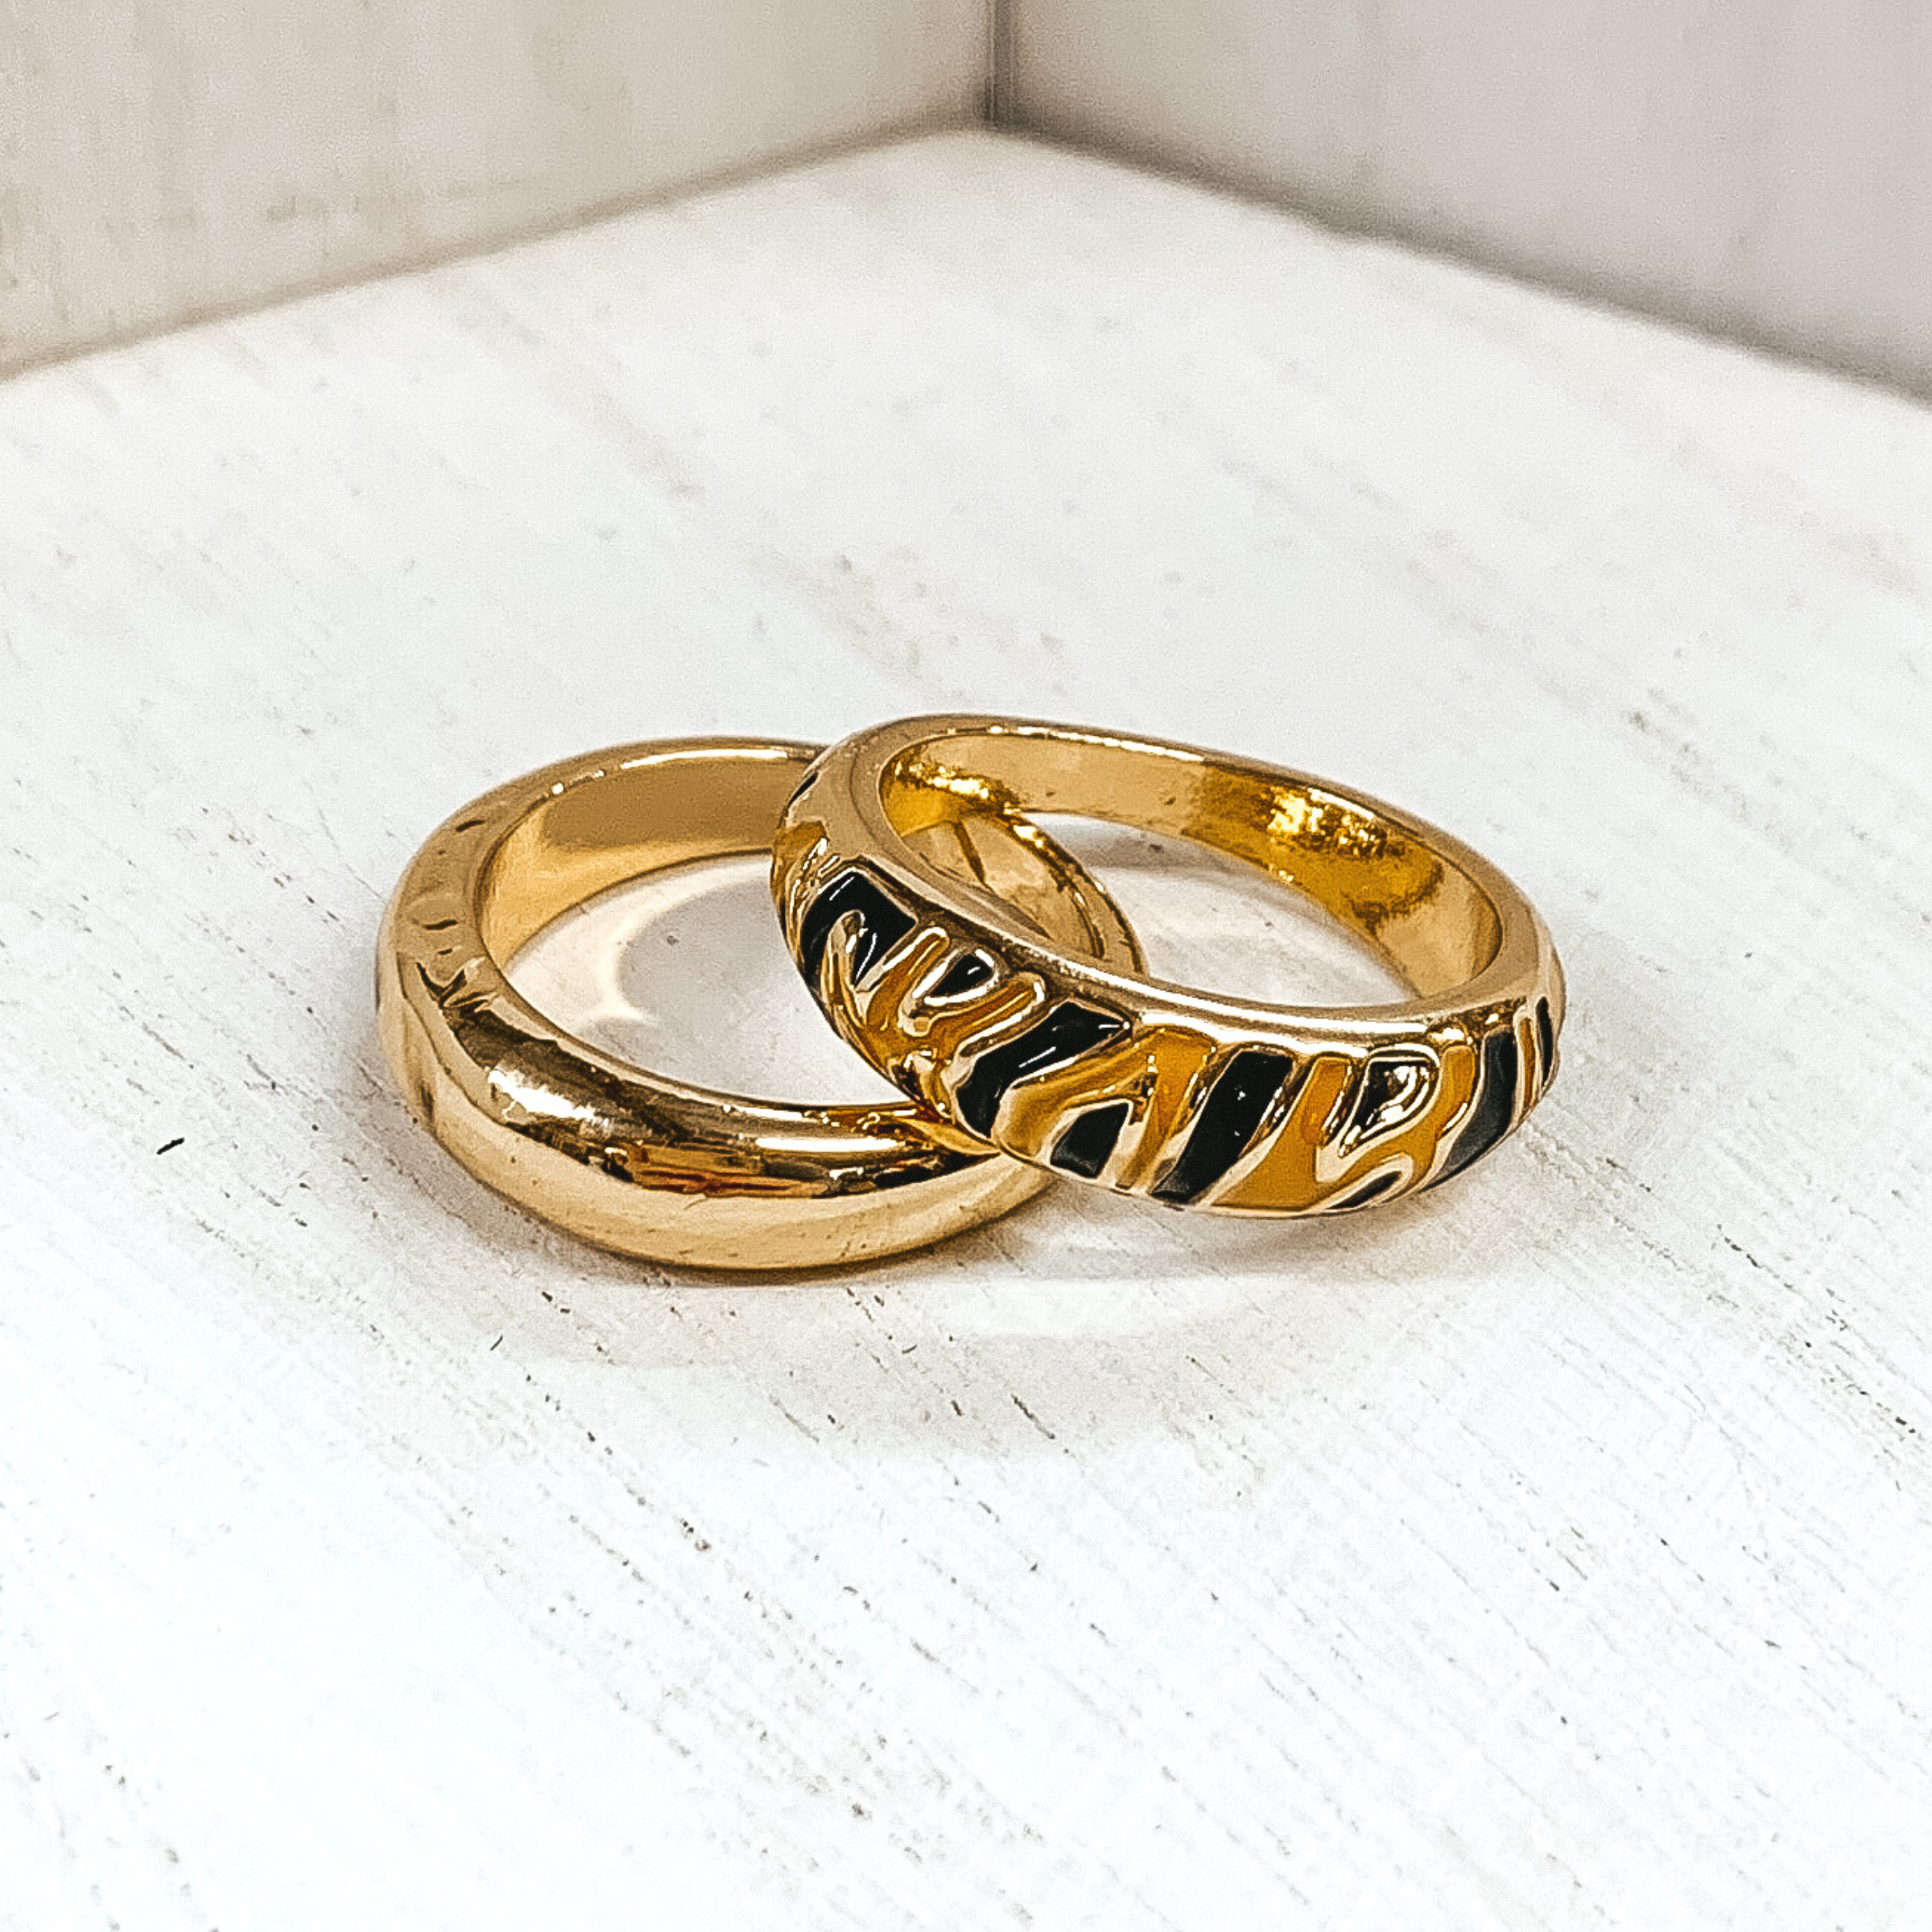 Set of two thick, gold rings. One ring is plain, while the secong ring has a tan colored part with tiger stripes. These rings are pictured on a white background. 